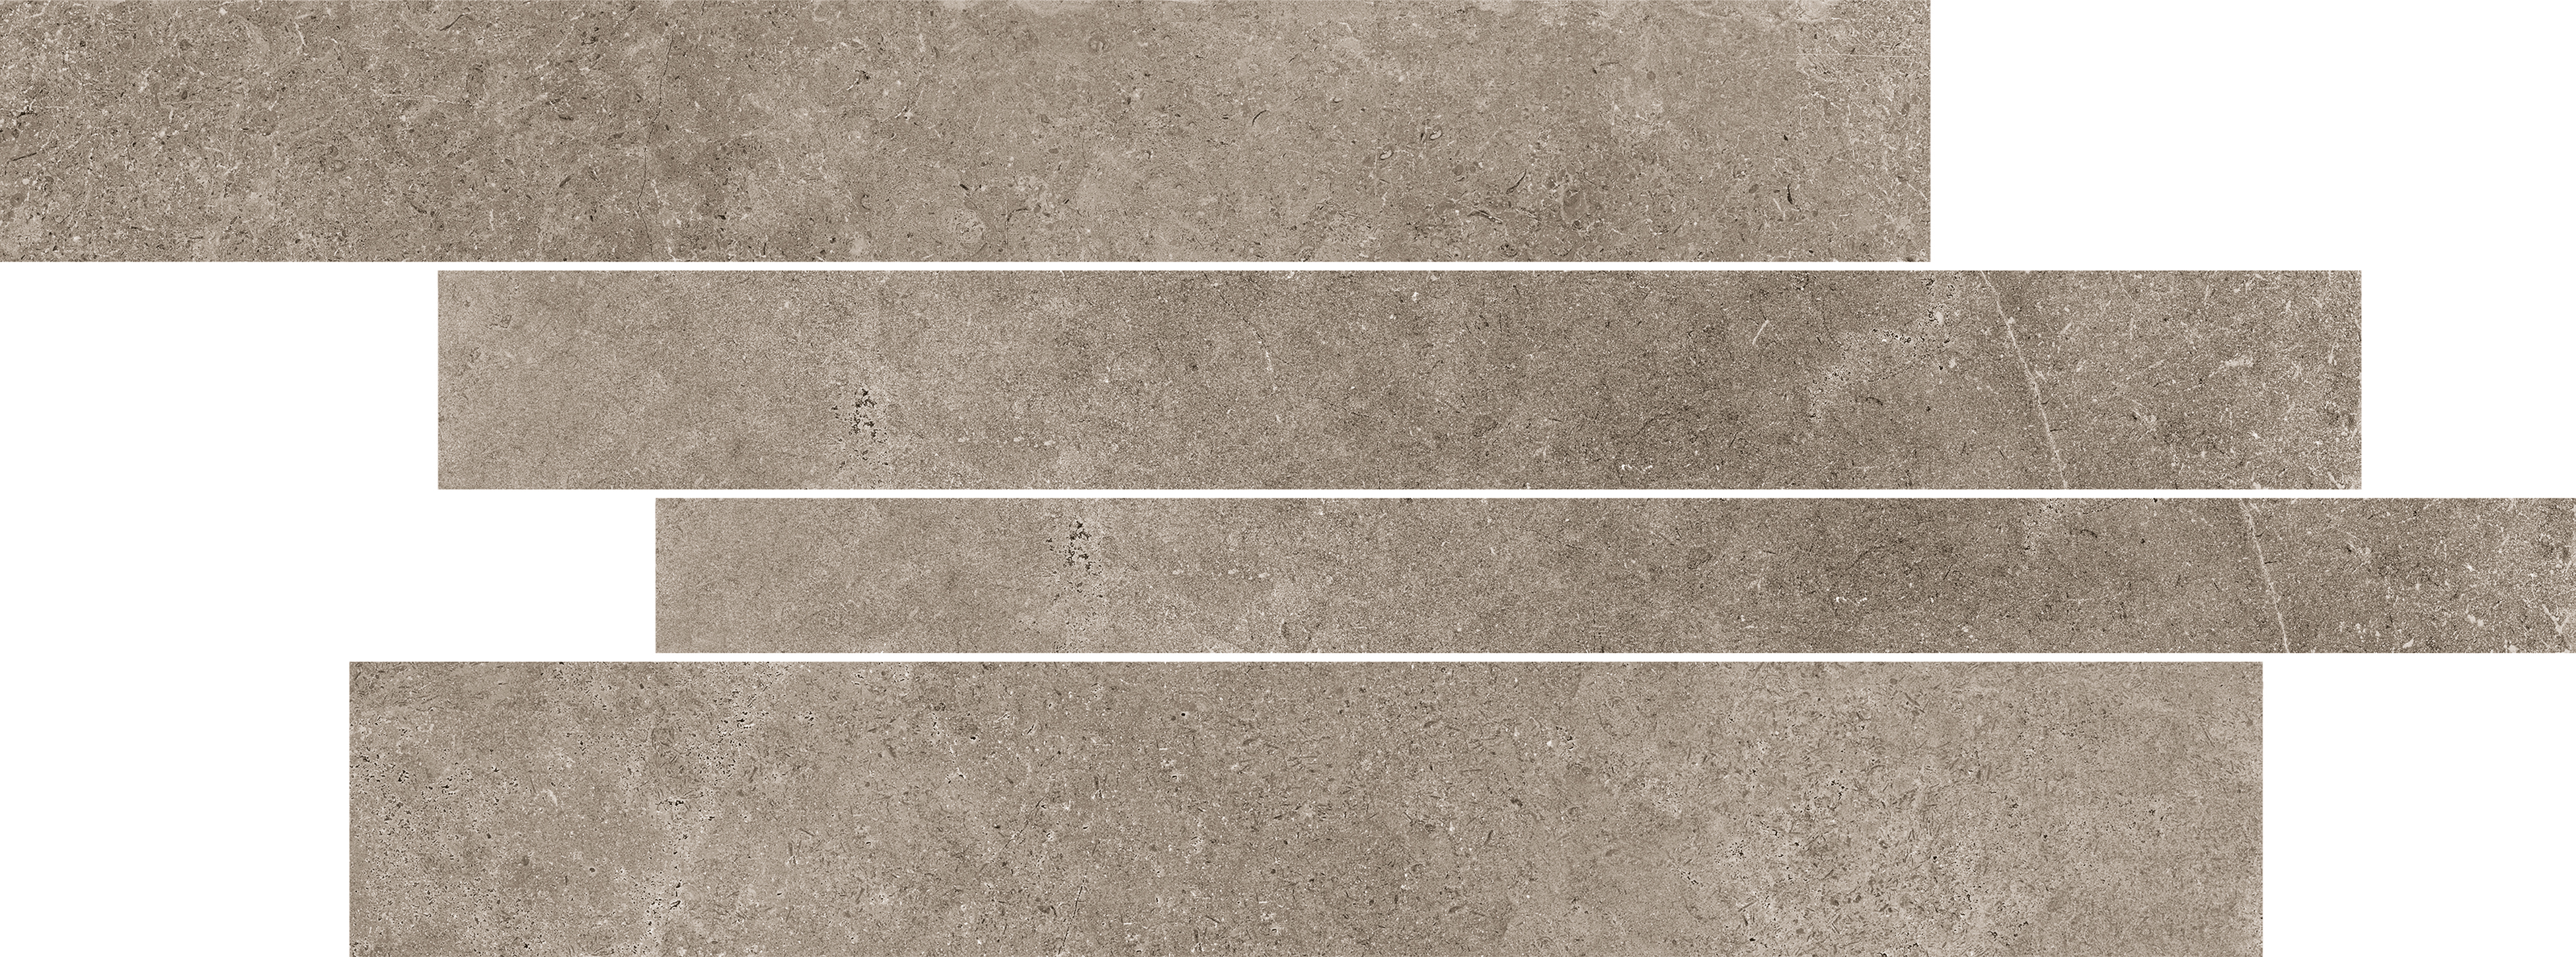 Panaria Prime Stone Greige Antibacterial - Soft Muretto PG-PMM3 30x60cm rectified 9,5mm